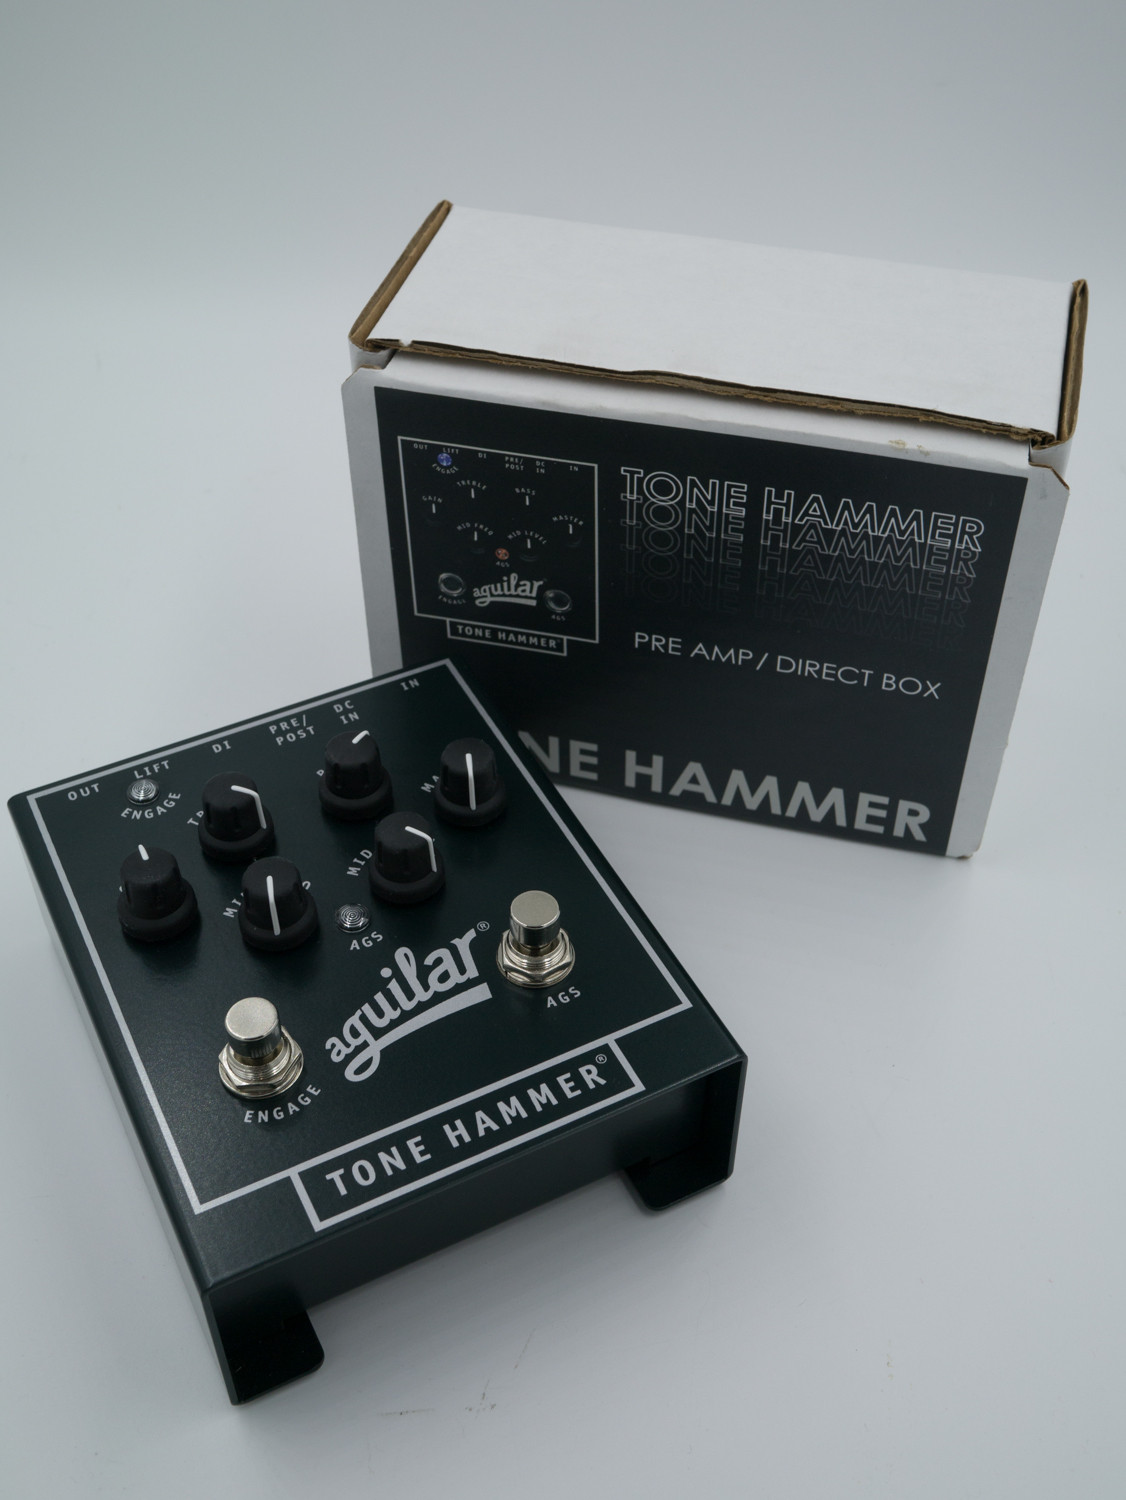 Aguilar Tone Hammer Preamp/Direct Box - Pedals - Products